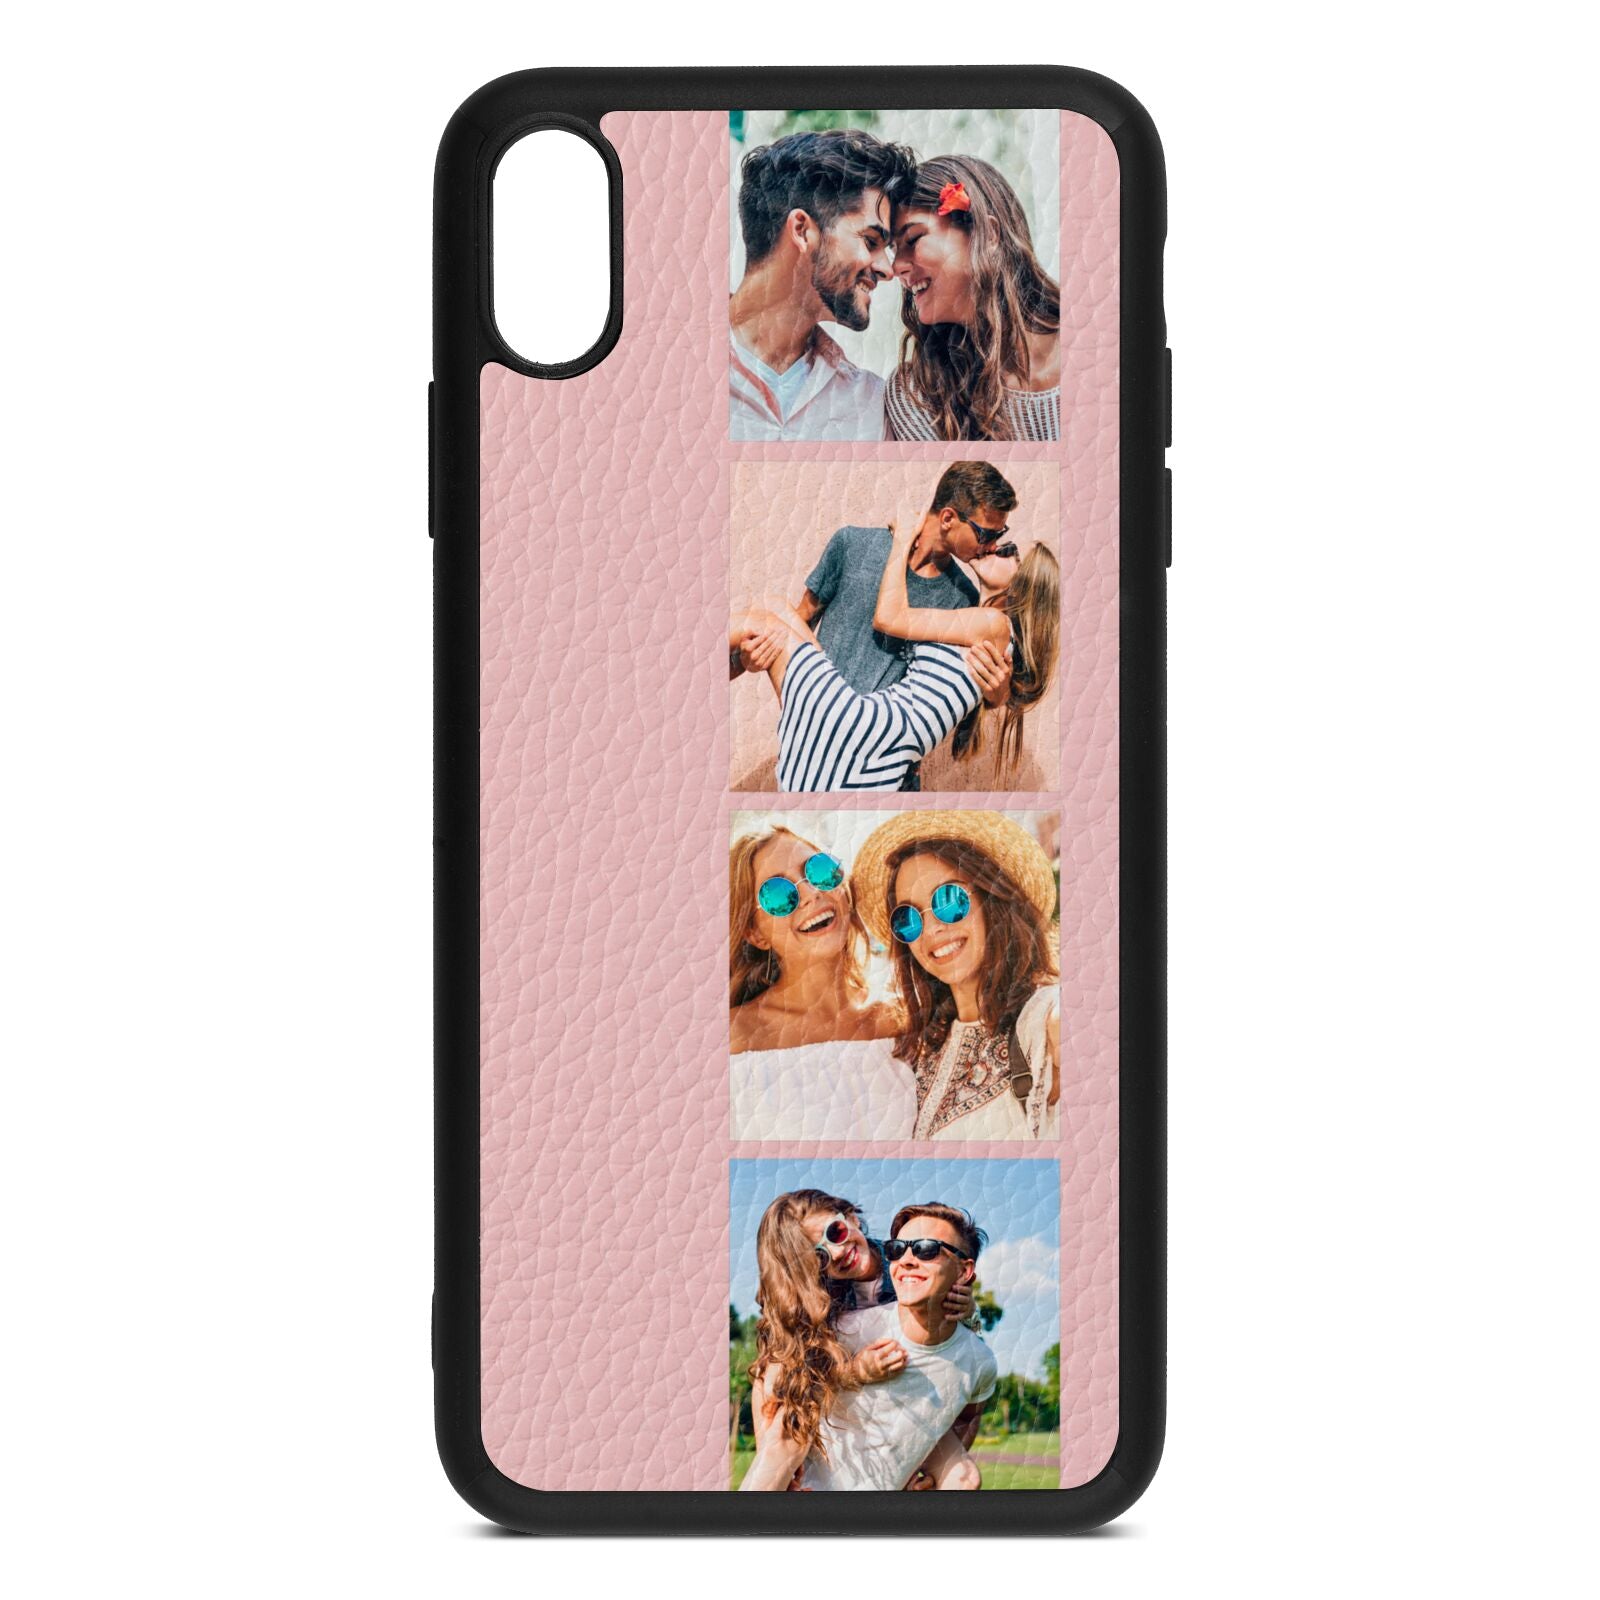 Photo Strip Montage Upload Pink Pebble Leather iPhone Xs Max Case